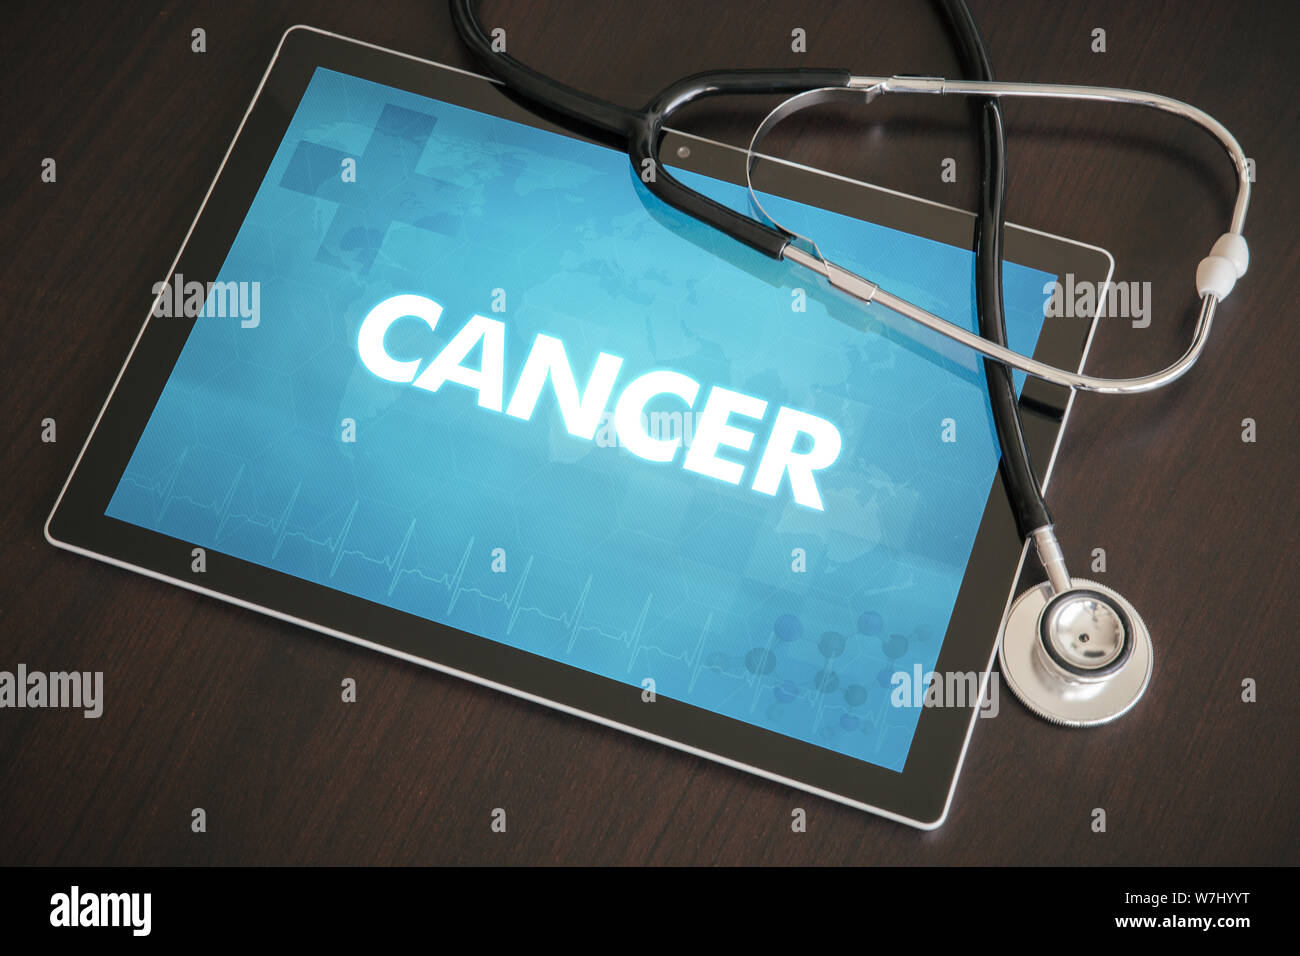 Cancer (lung, breast, liver) diagnosis medical concept on tablet screen with stethoscope Stock Photo